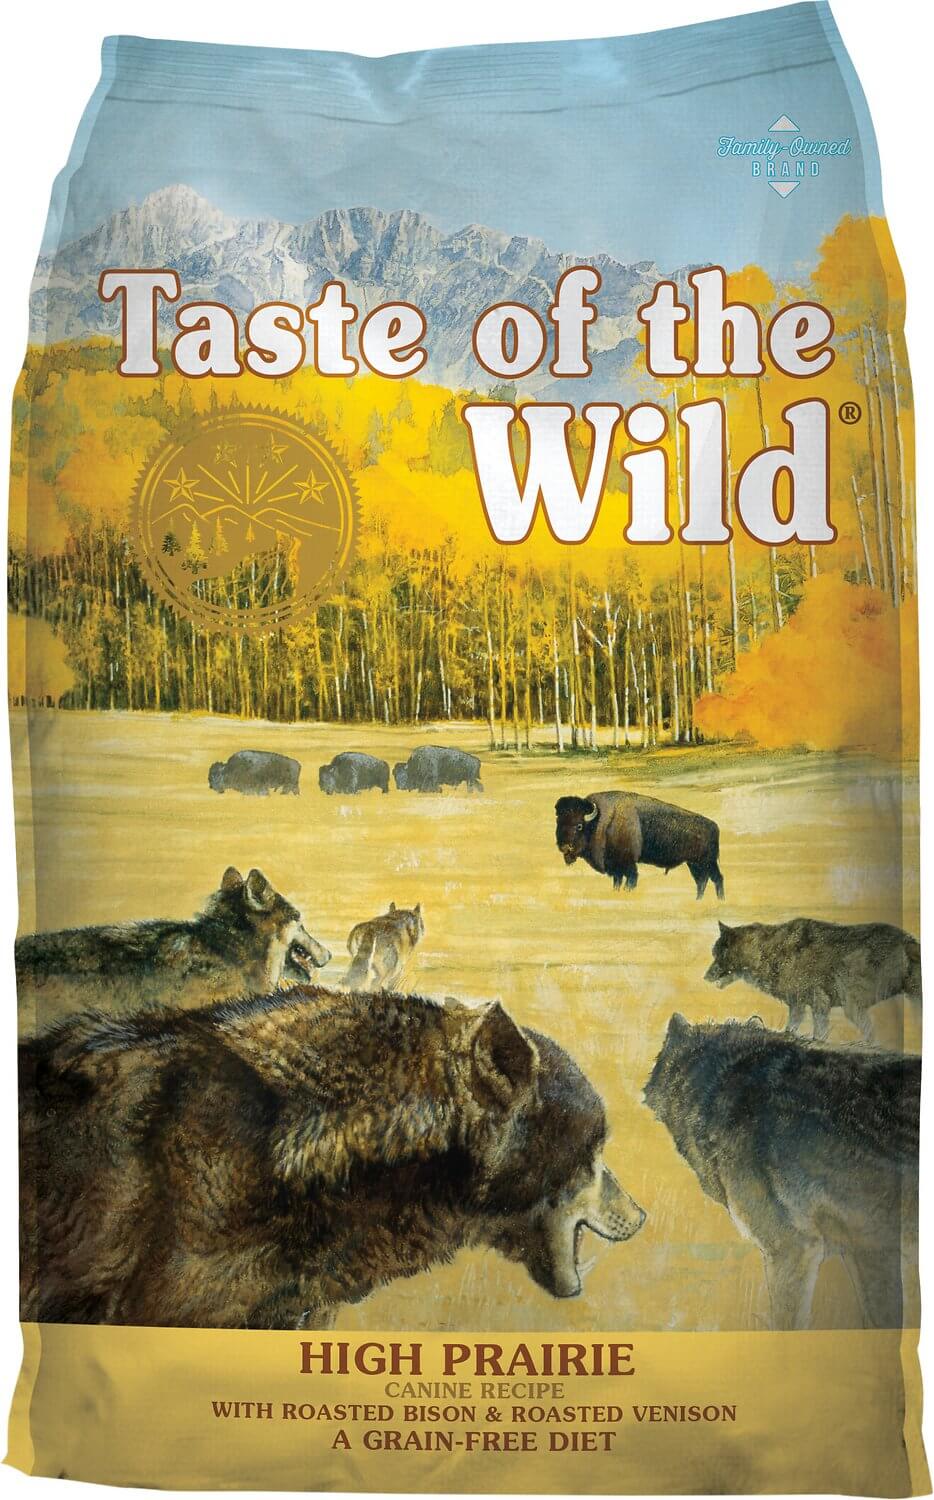 Taste of the Wild Dog Food Review 2023 Ratings Recalls